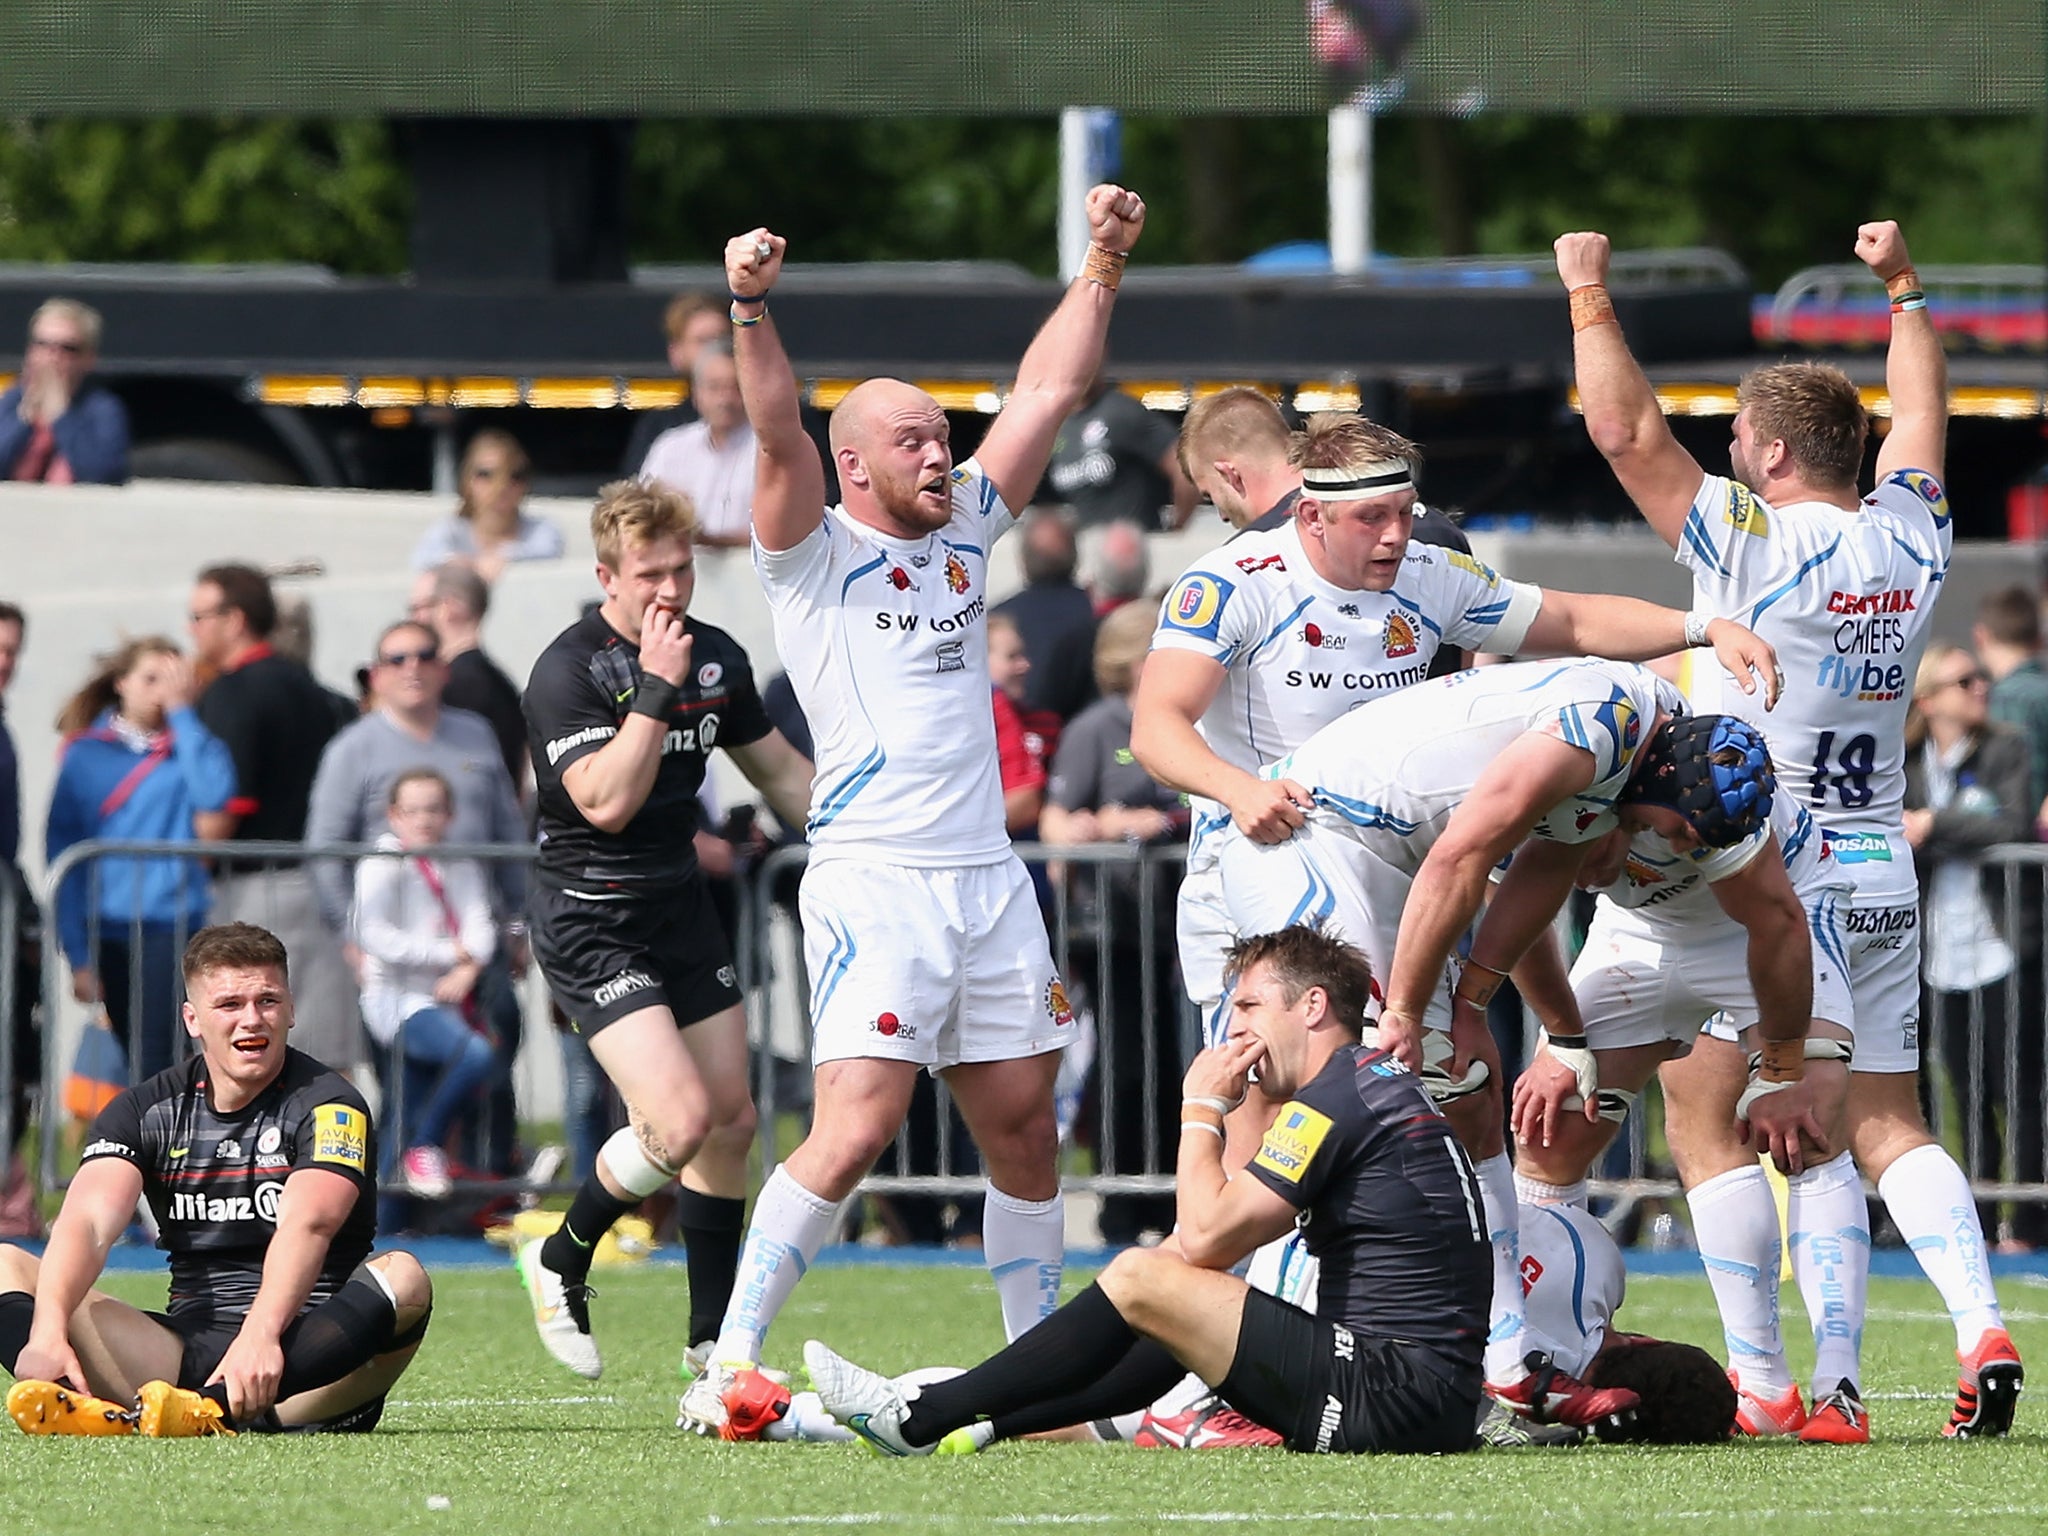 Exeter Chiefs celebrate their victory in the Aviva Premiership match against Saracens